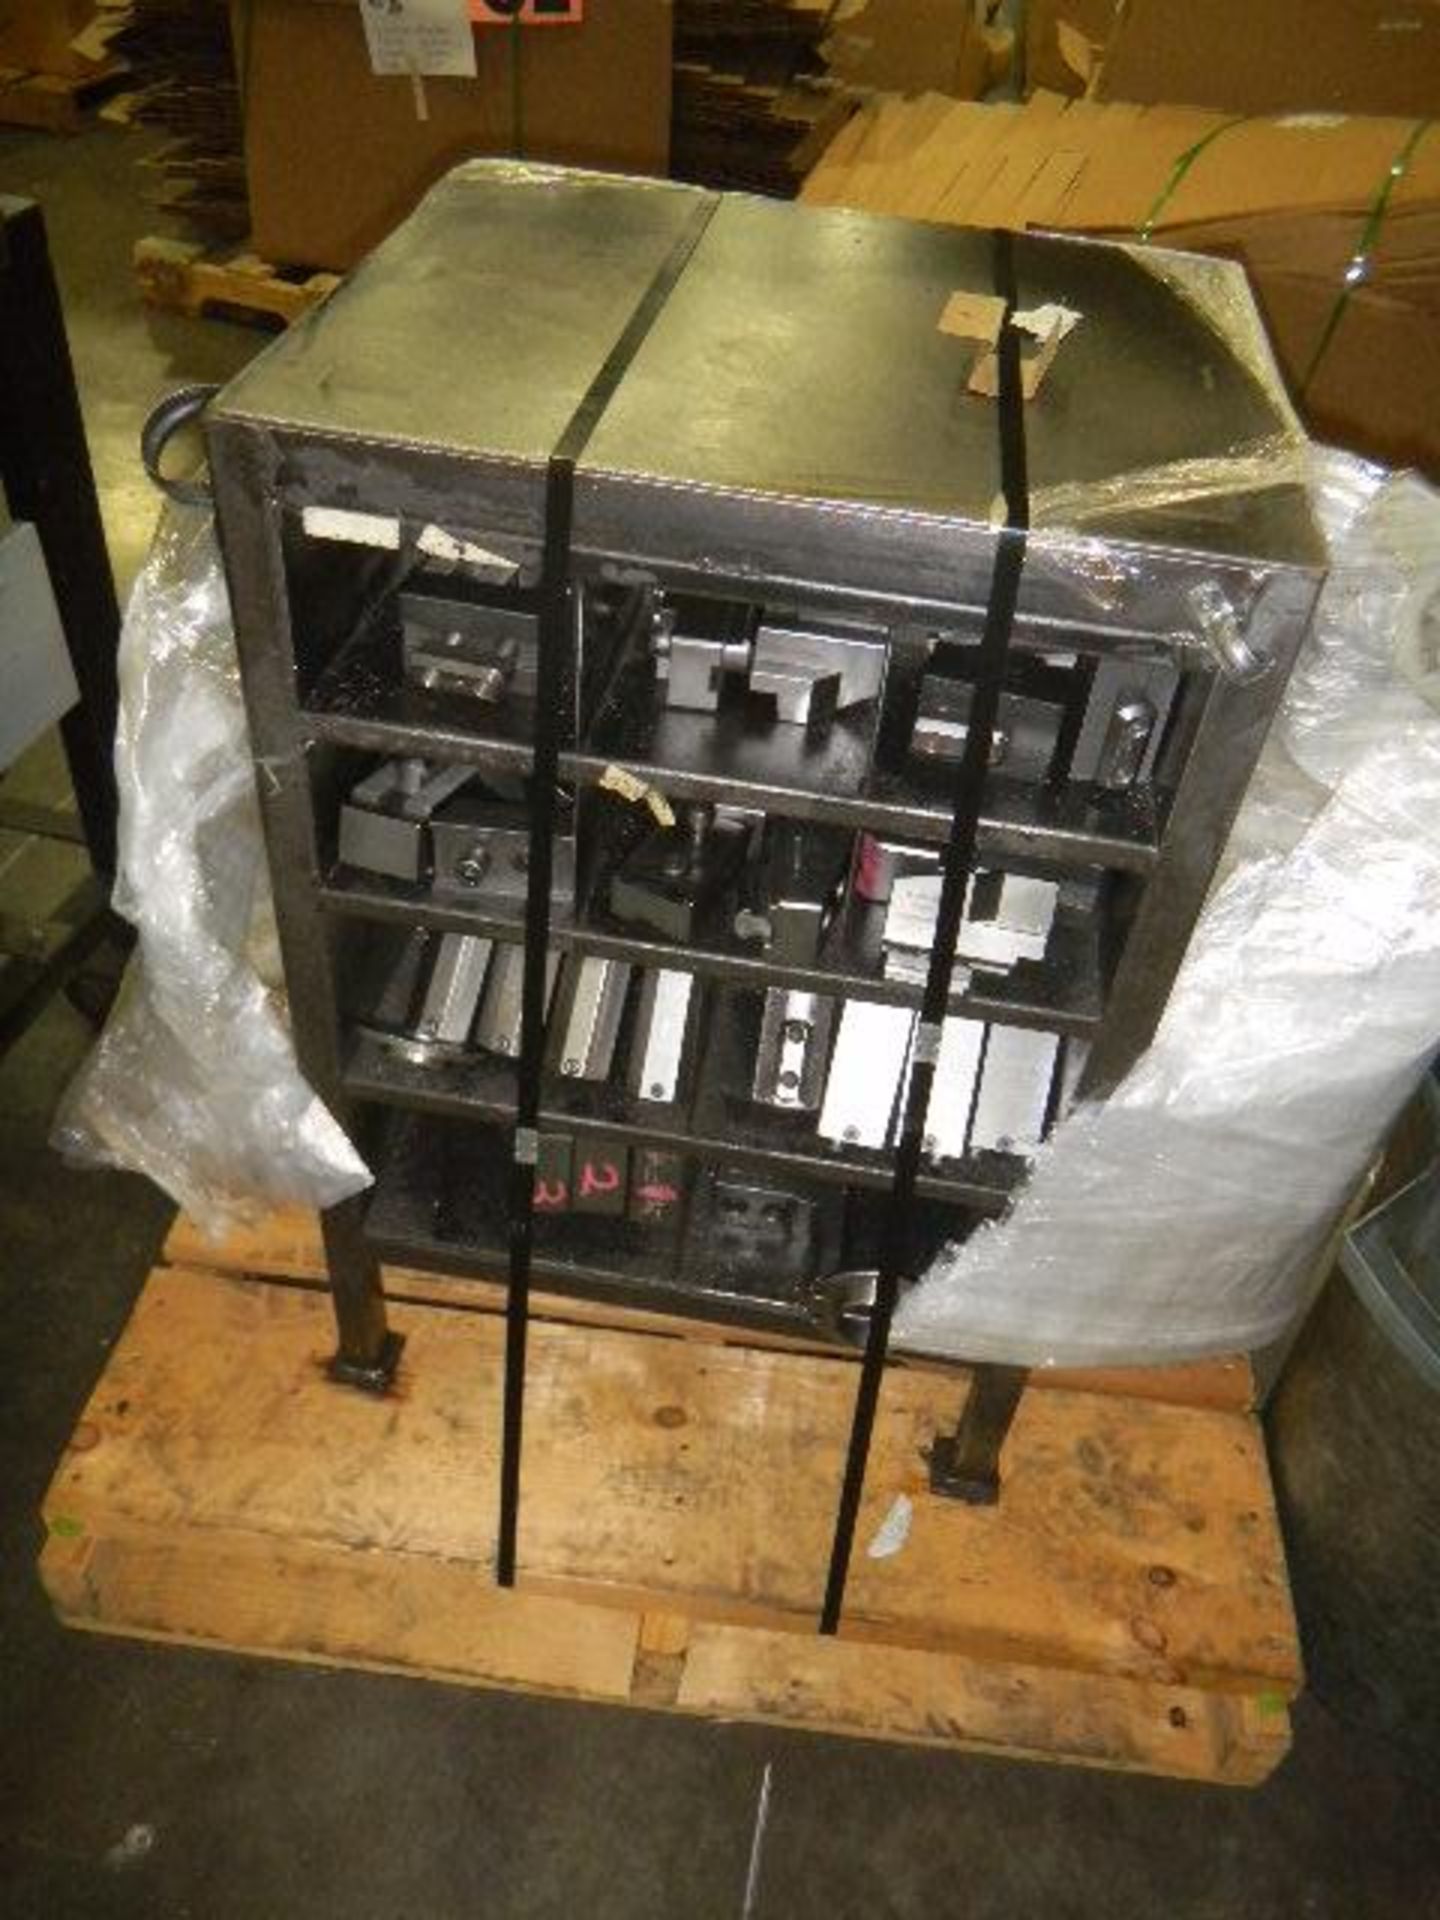 Steel Cabinet & Contents (Chuck Jaws / Dies) on Pallet